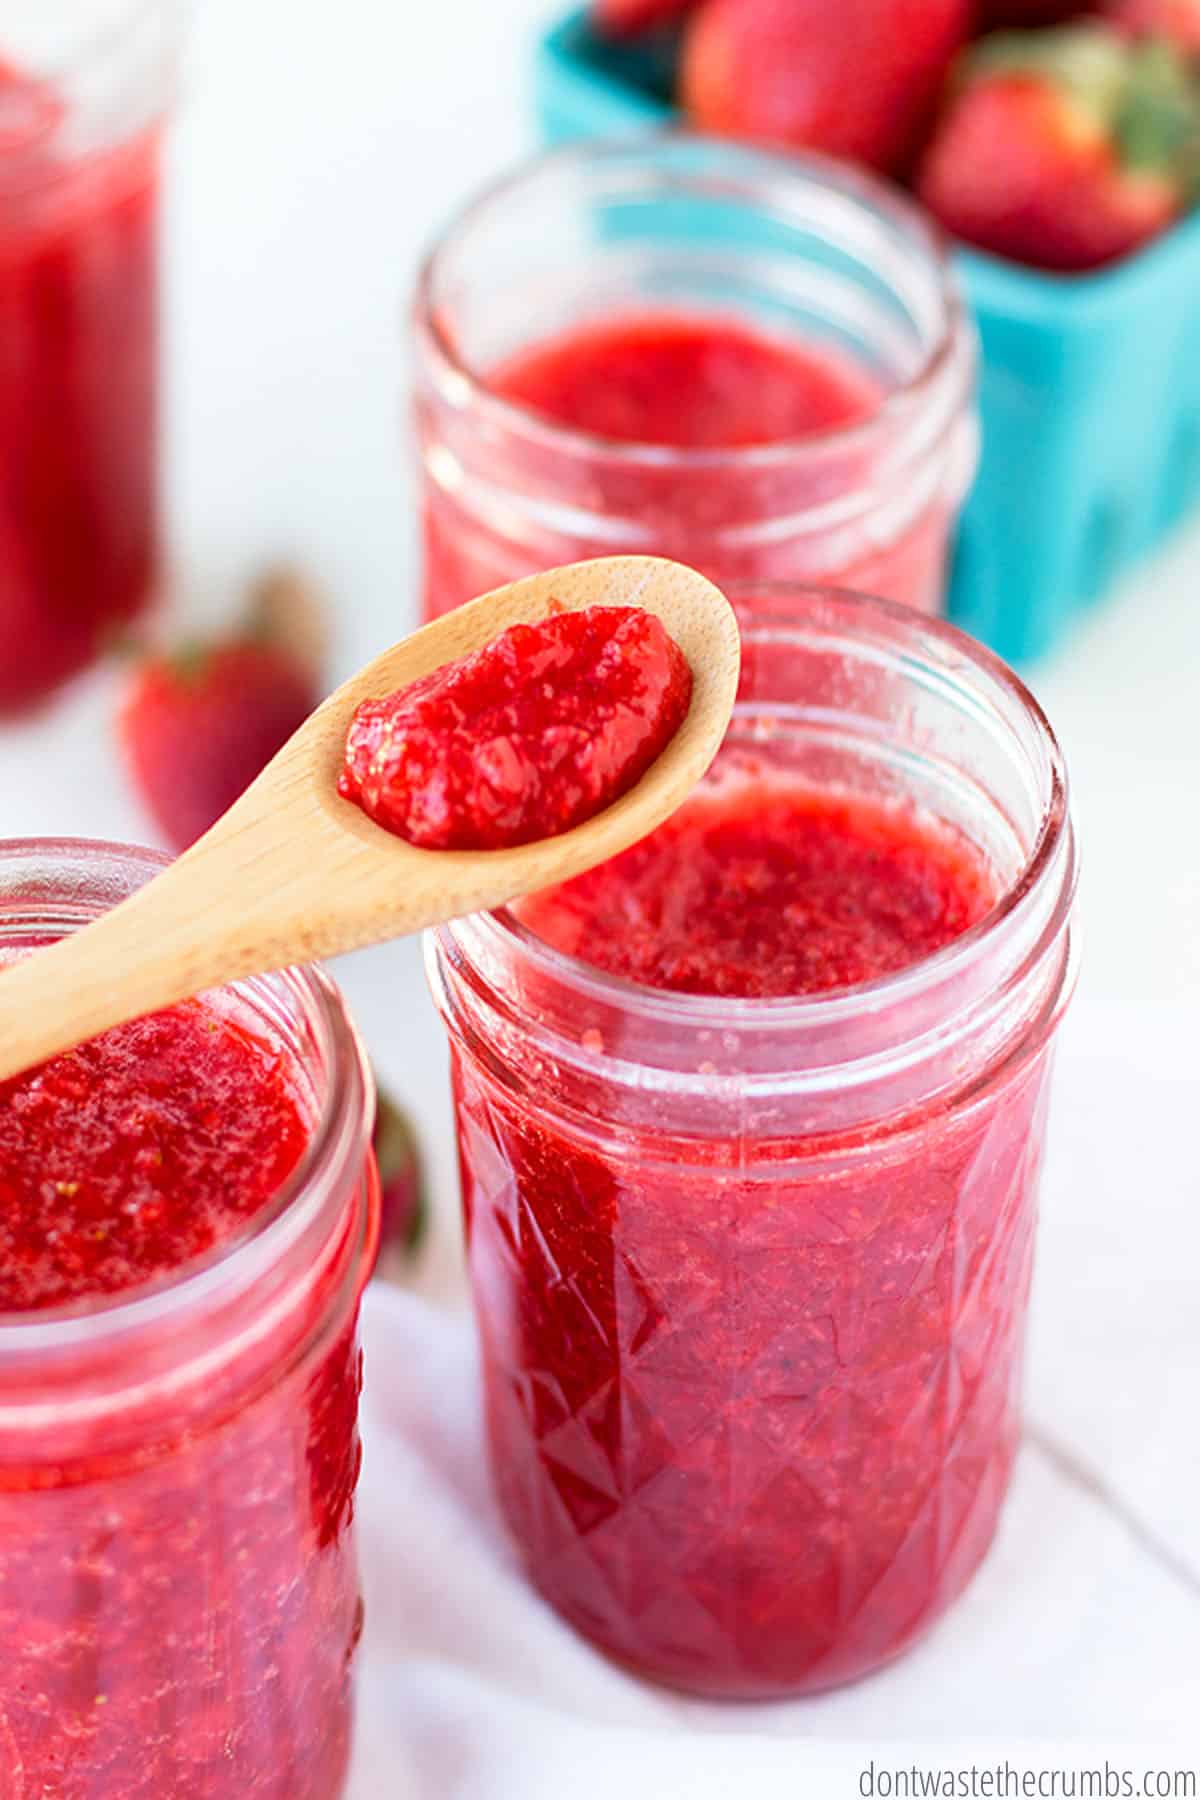 Three jars are filled with strawberry jam.